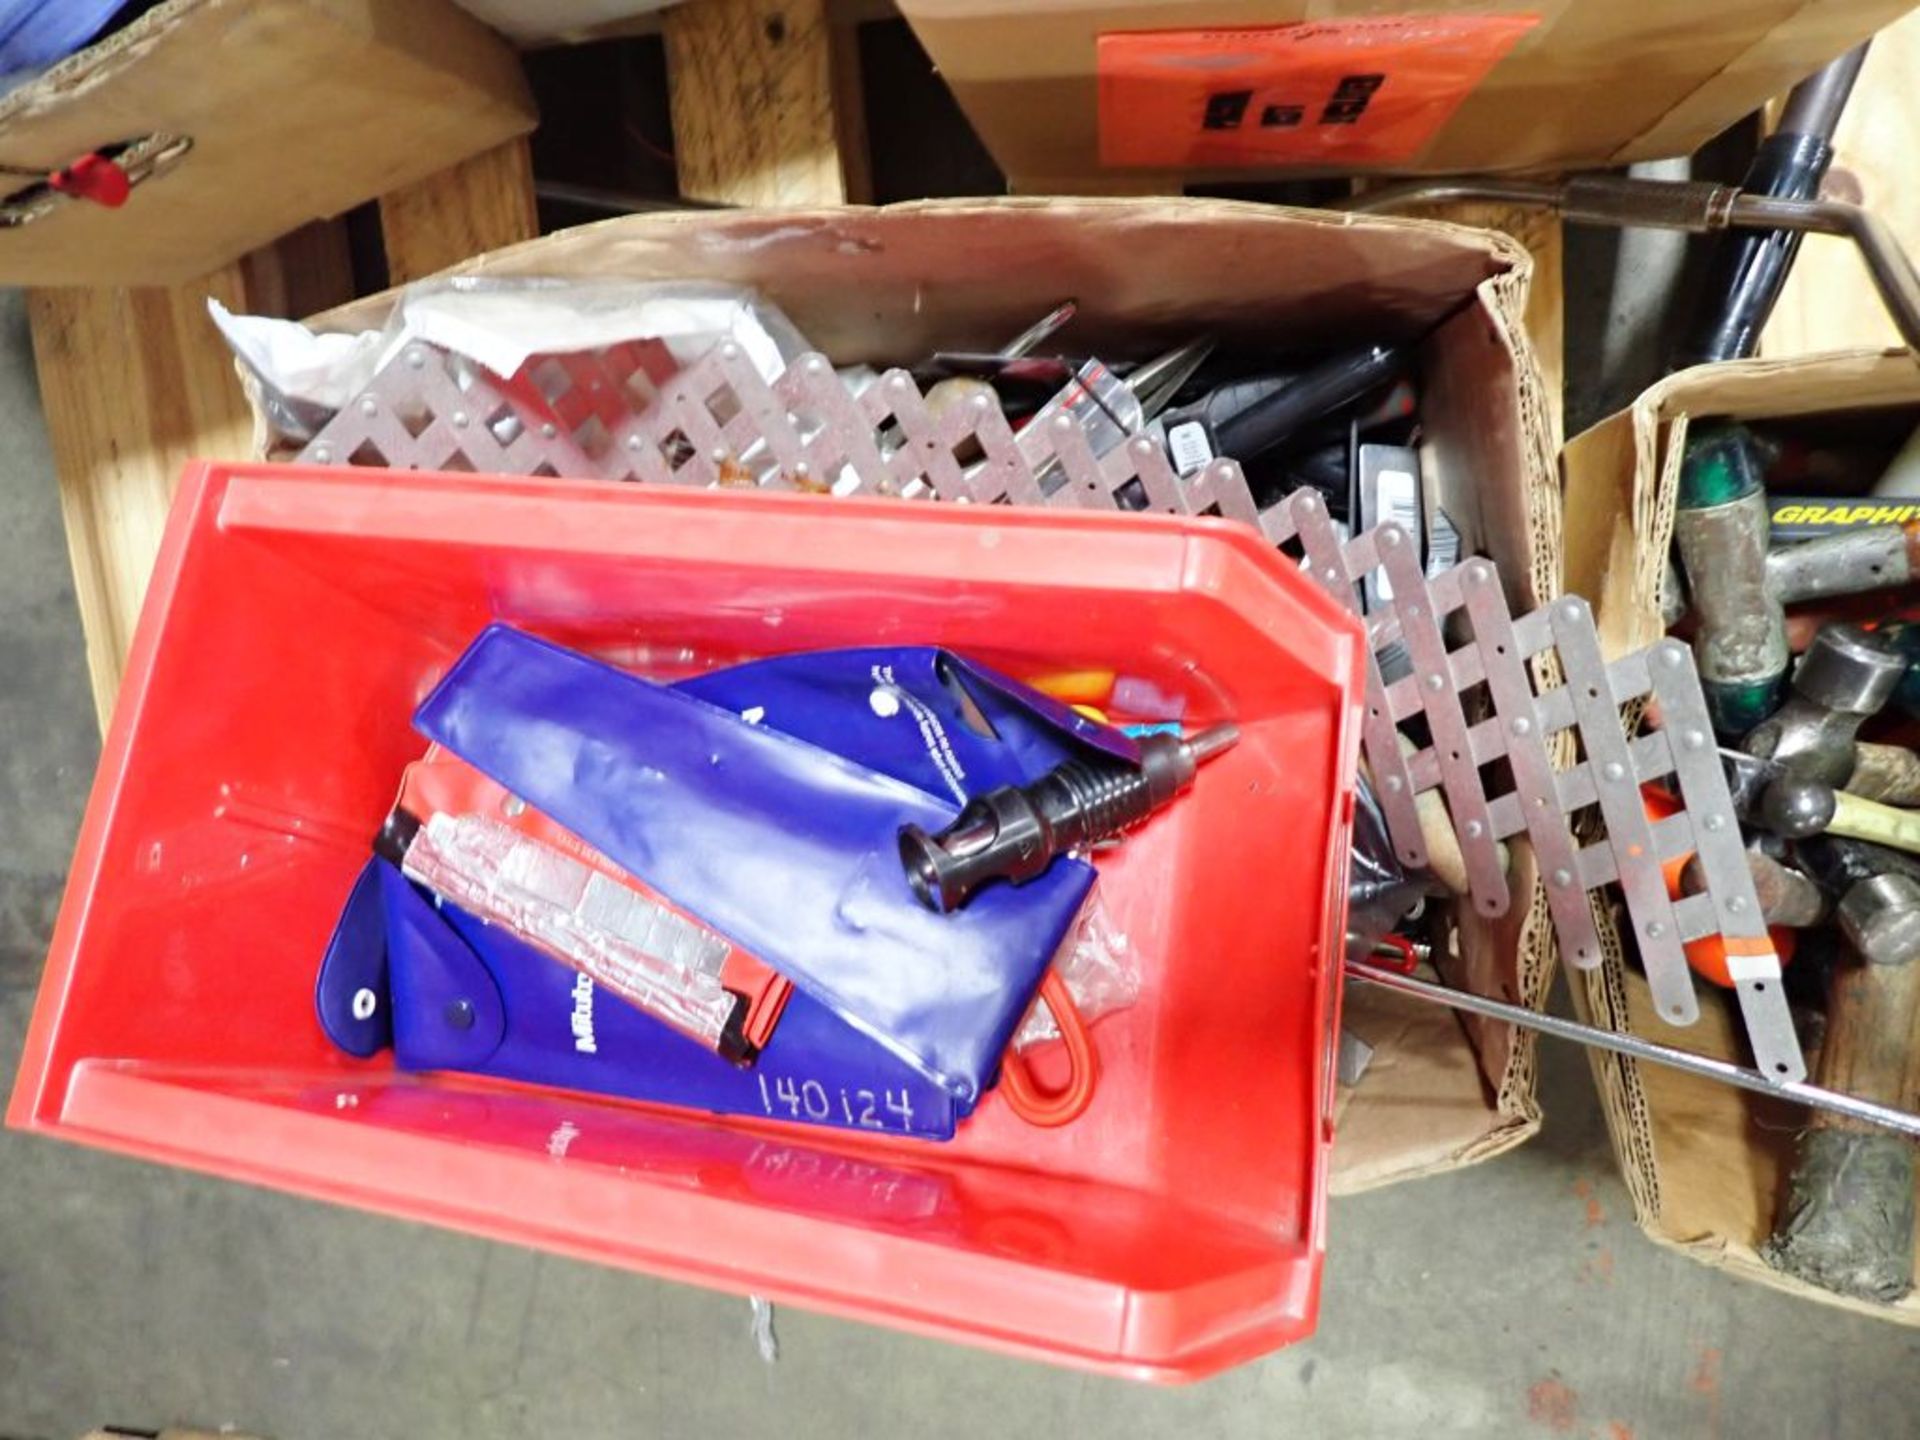 Lot of Assorted Tools | Tag: 241476 | Limited Forklift Assistance Available - $10.00 Lot Loading - Image 3 of 8